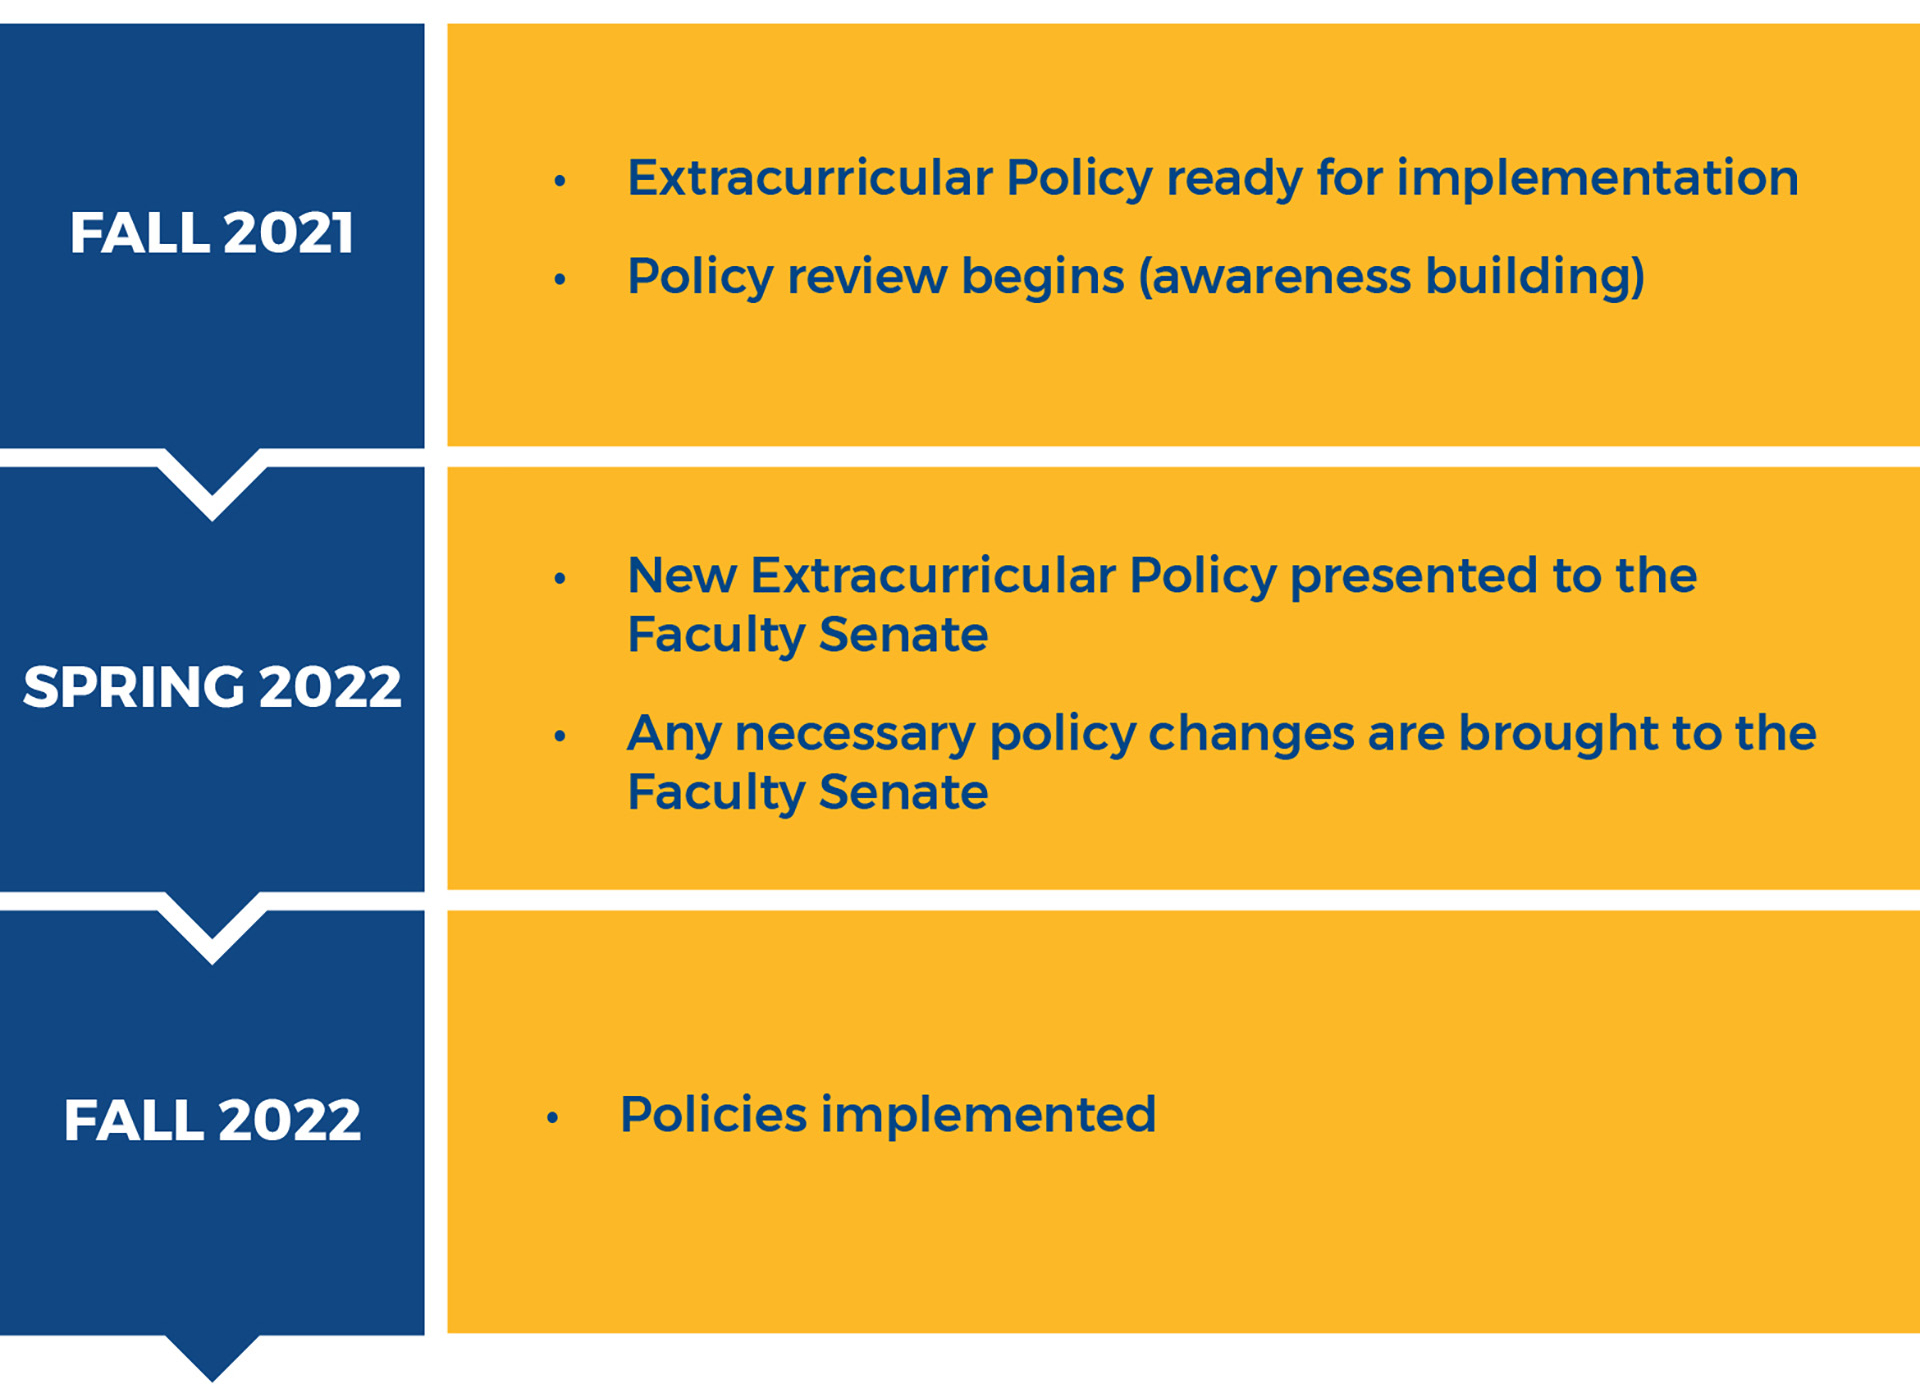 Fall 2021 - Extra curricular Policy ready for implementation, Policy review begins (awareness building). Spring 2022- Mew Extracurricular Policy presented to the Faculty Senat, Any necessary policy changes are brought to the faculty senate. Fall 2022 - policies implemented